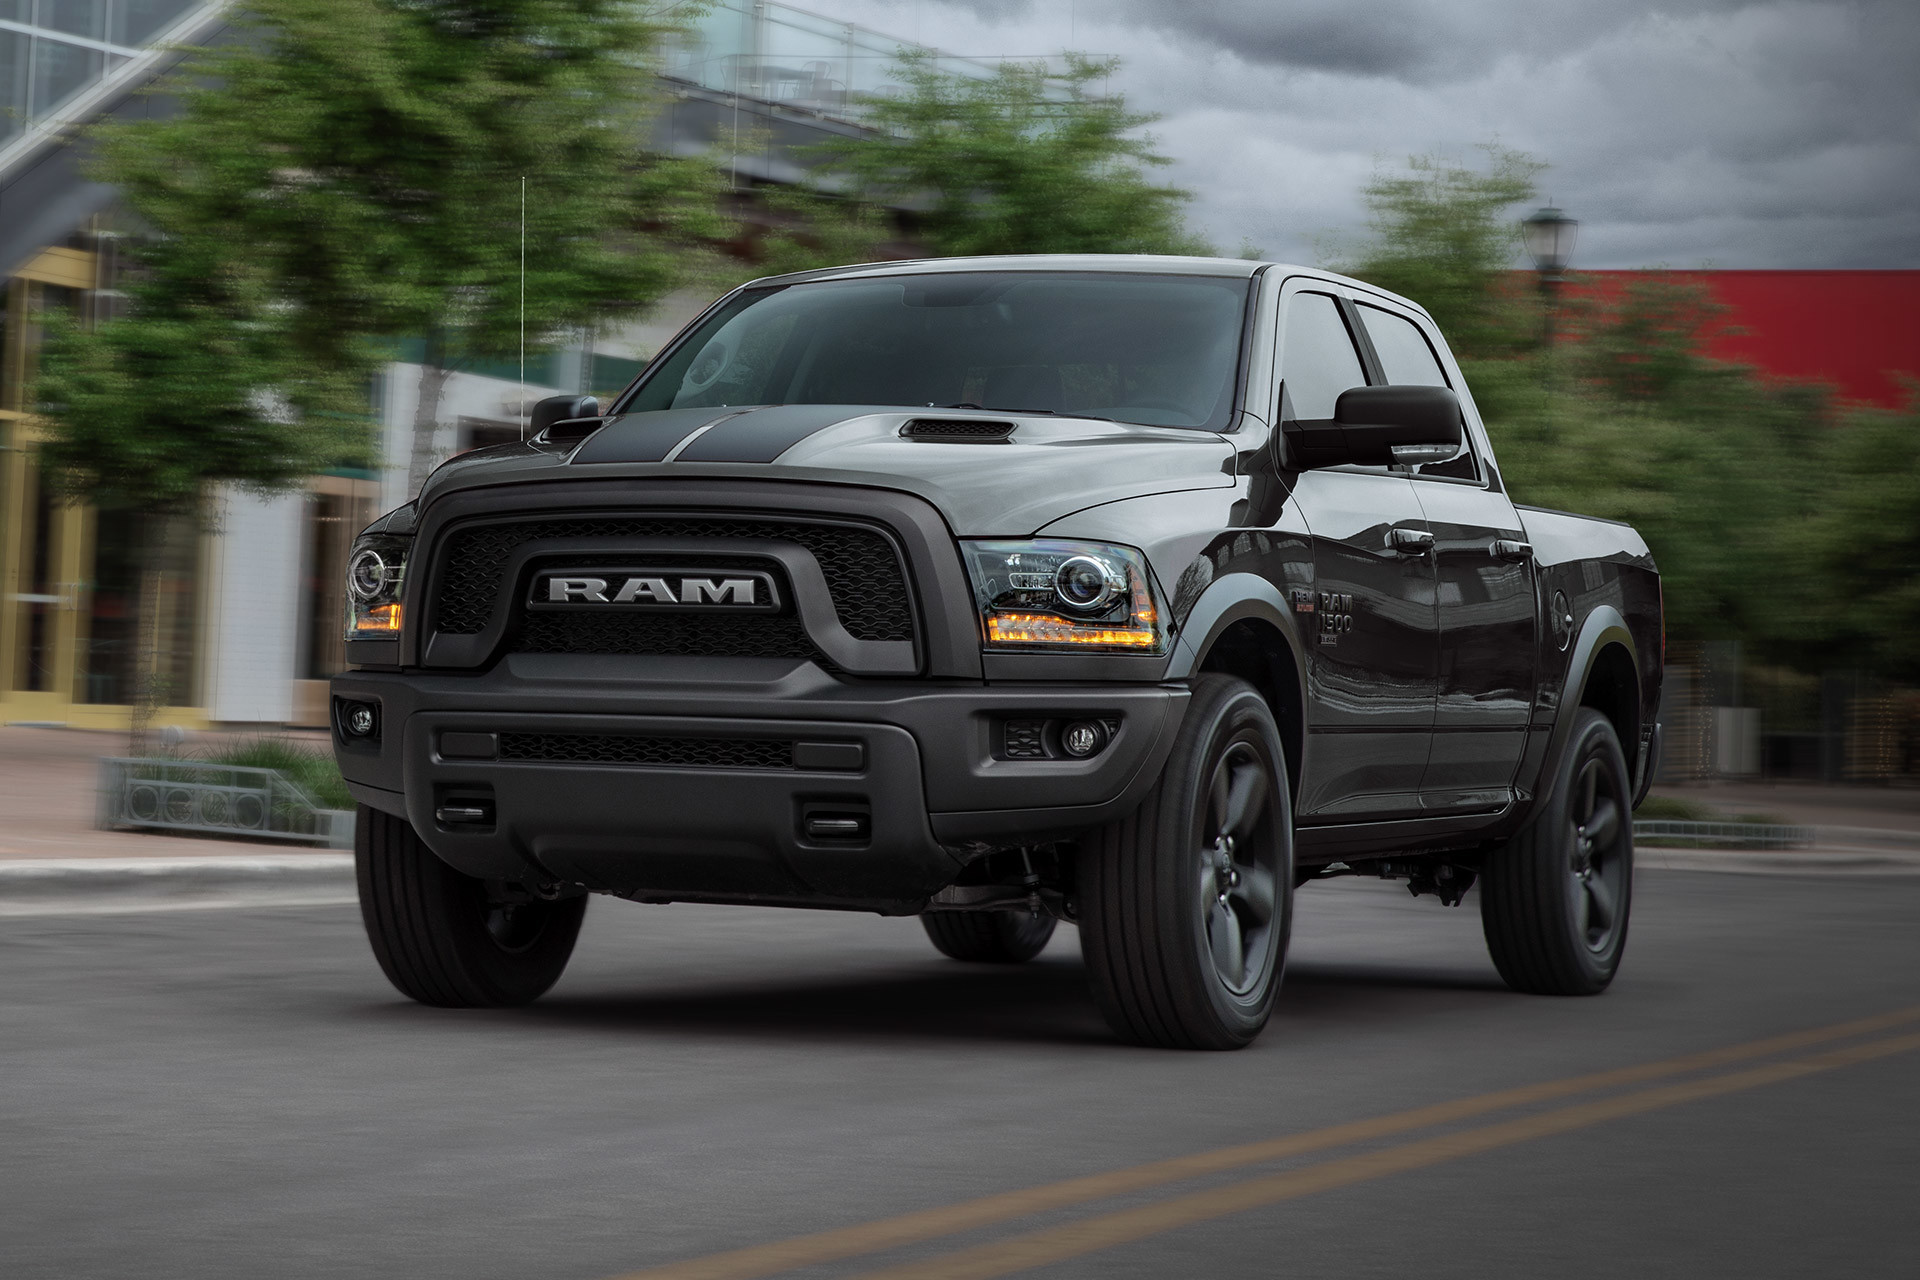  A front view of a Diamond Black Crystal Pearl 2021 Ram 1500 Classic Warlock being driven on a road in front of a glass-walled building.